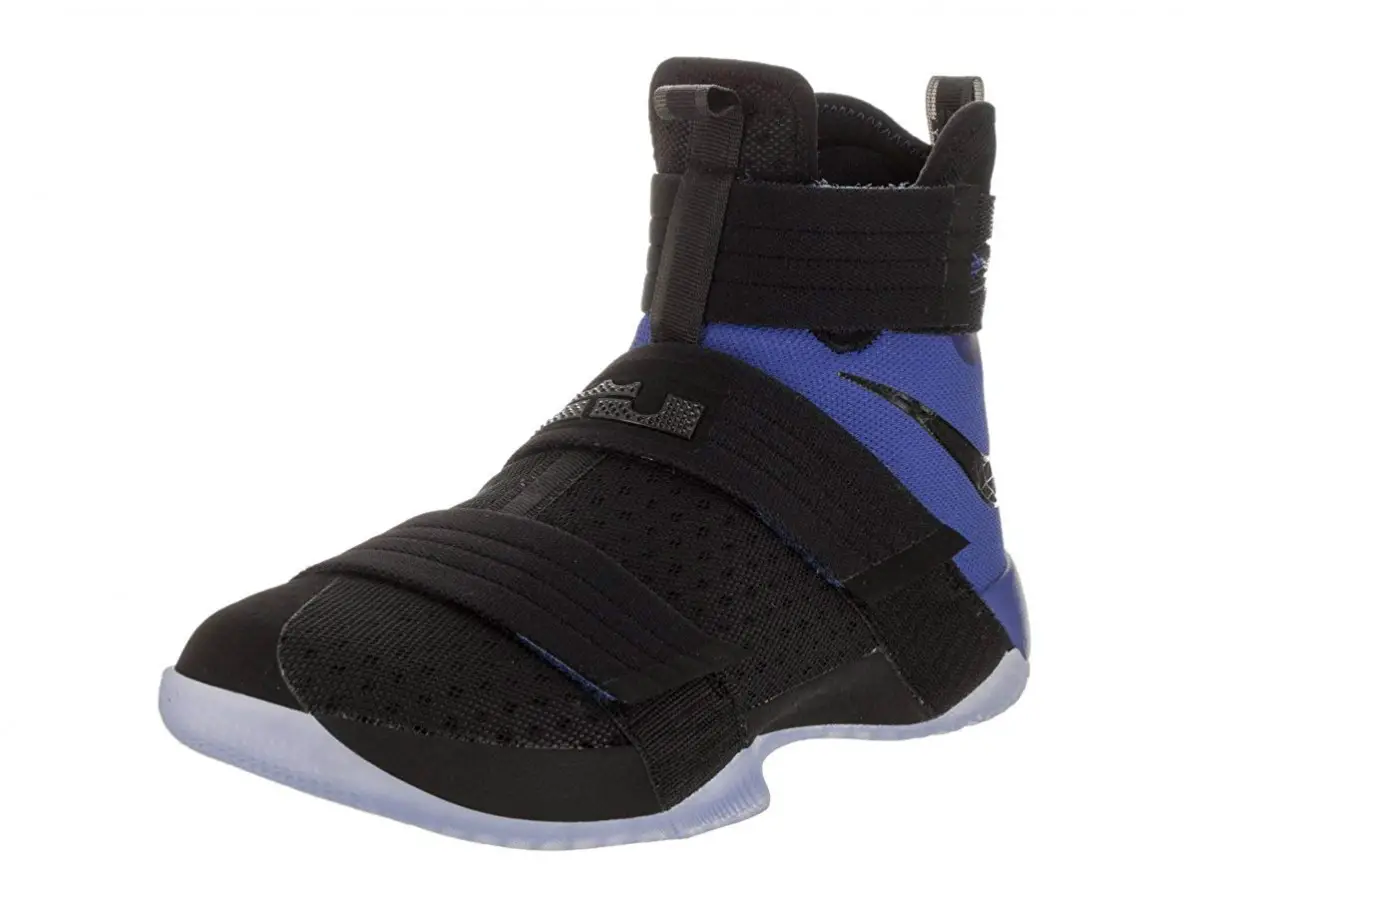 Nike Lebron Soldier 10 SFG has an all strap system for comfort fit and support on the court or in the gym.